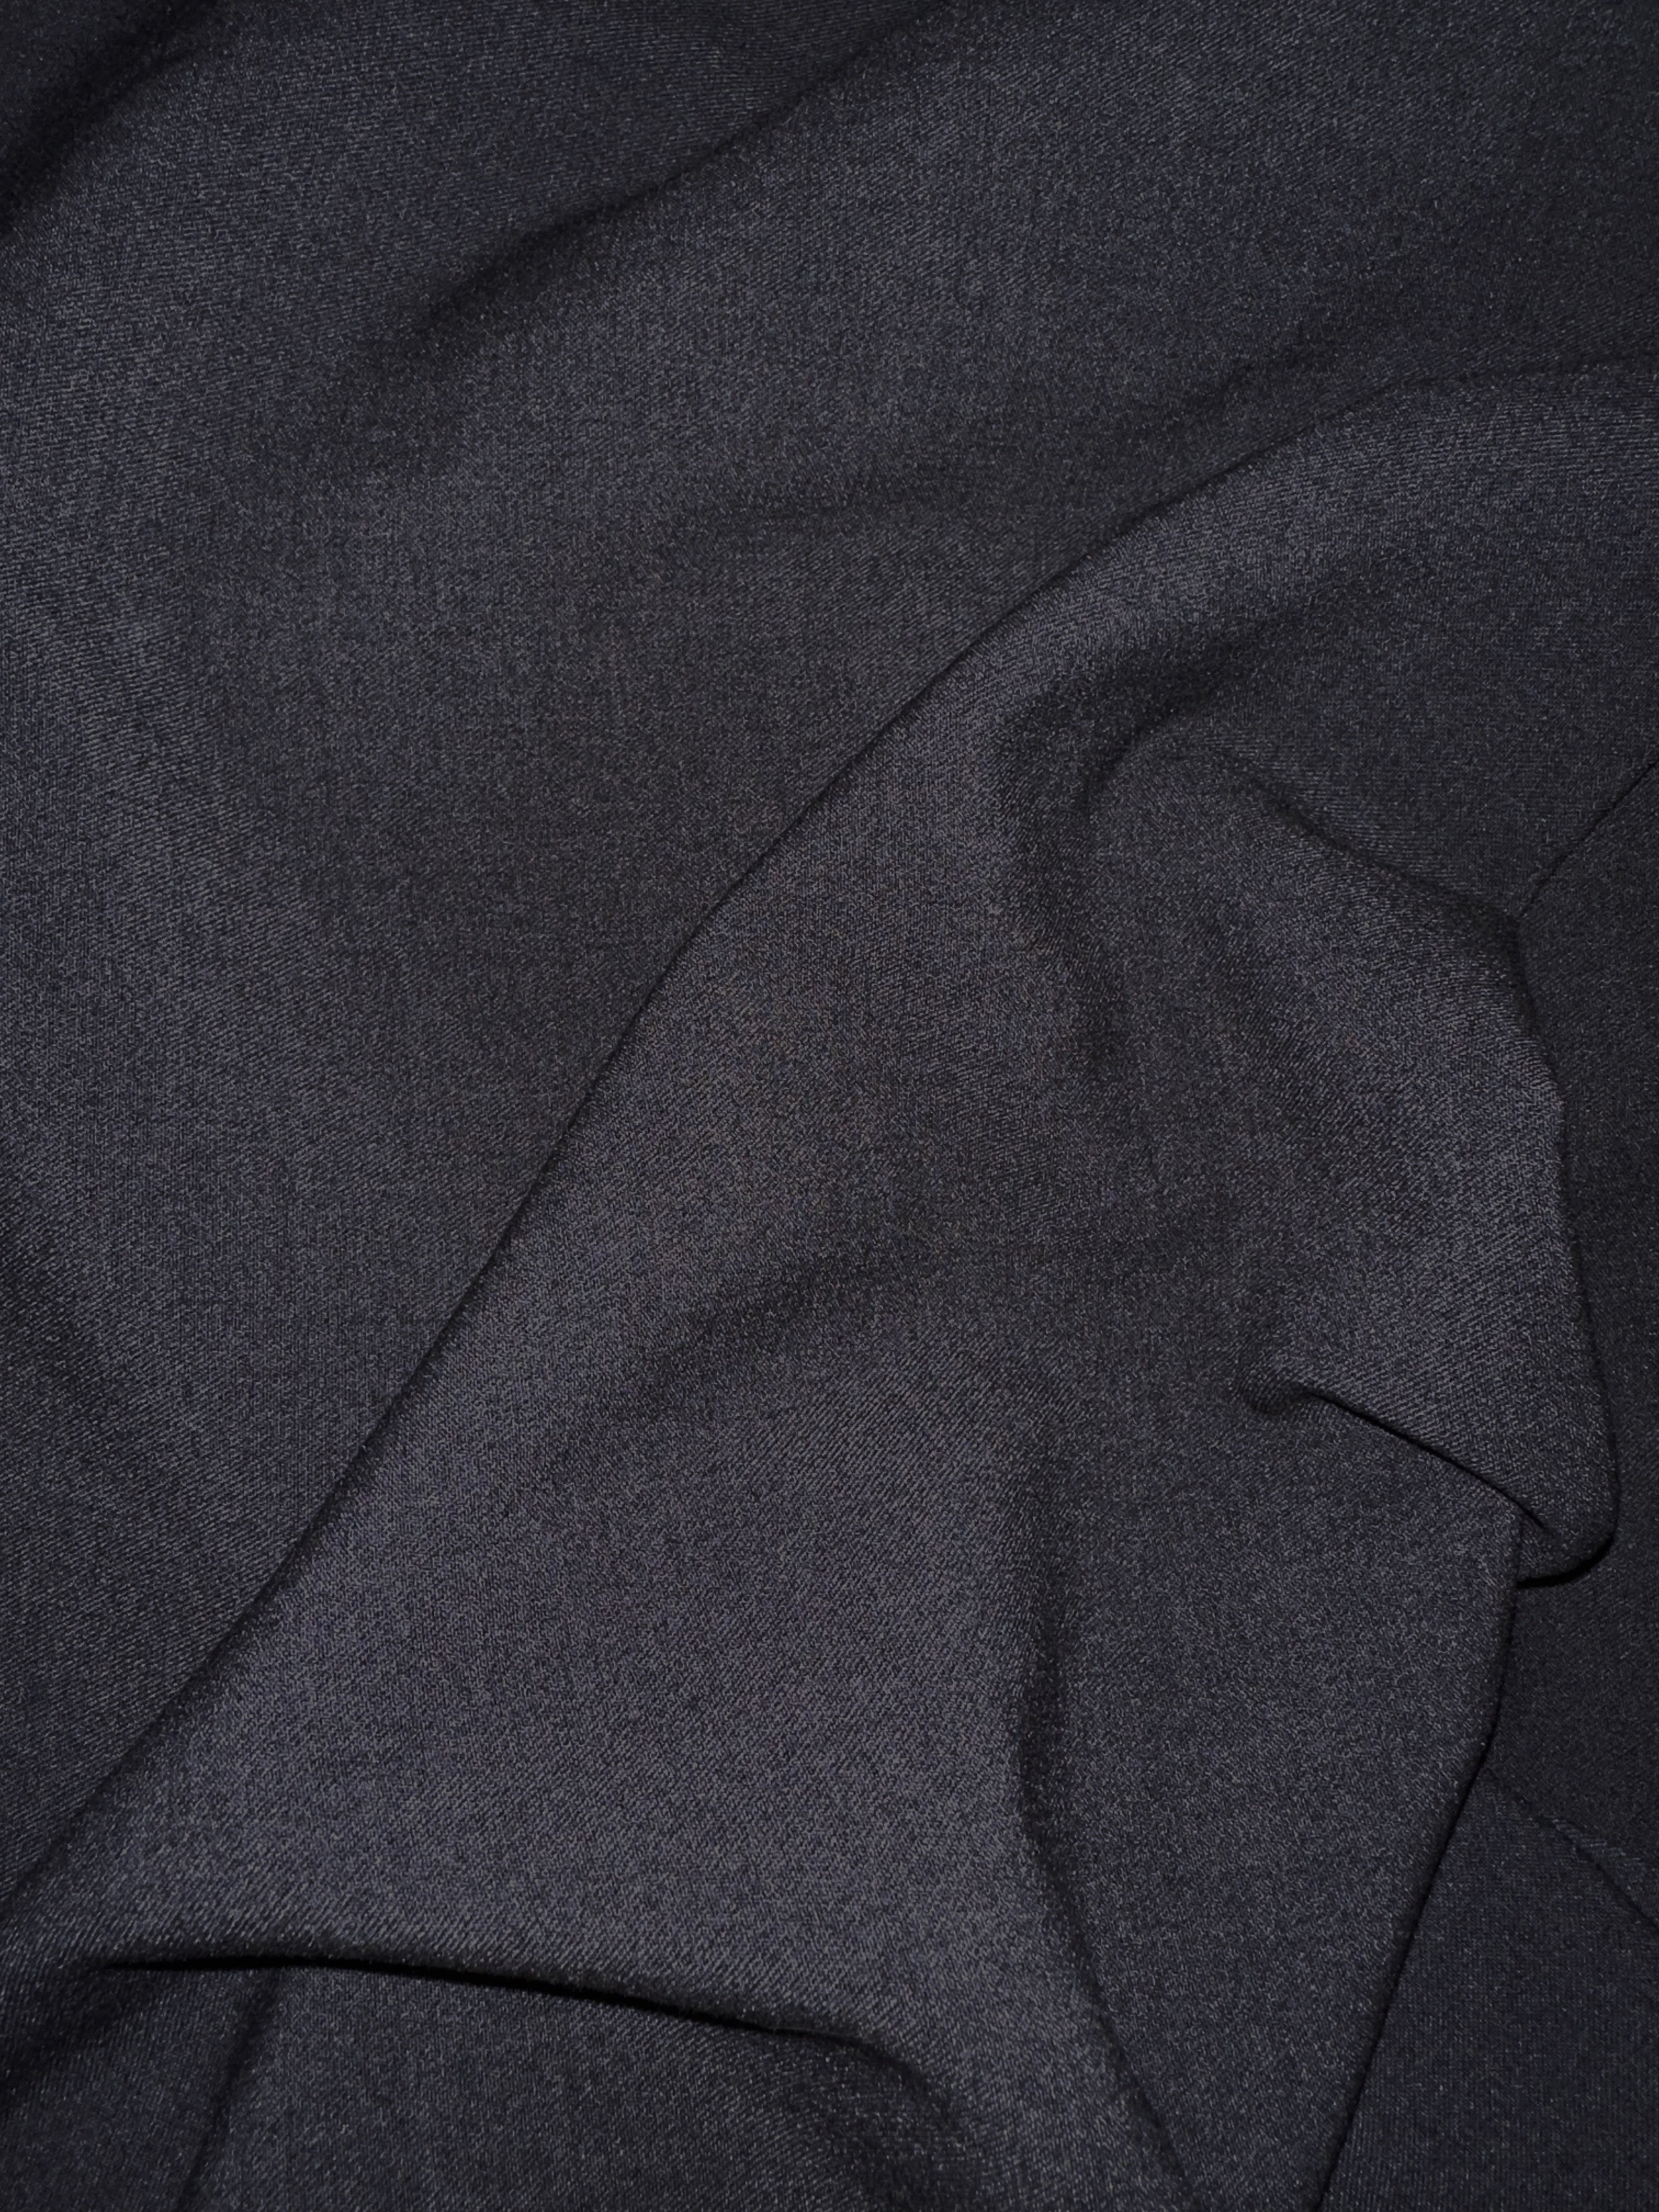 Charcoal Stretch Cotton Twill